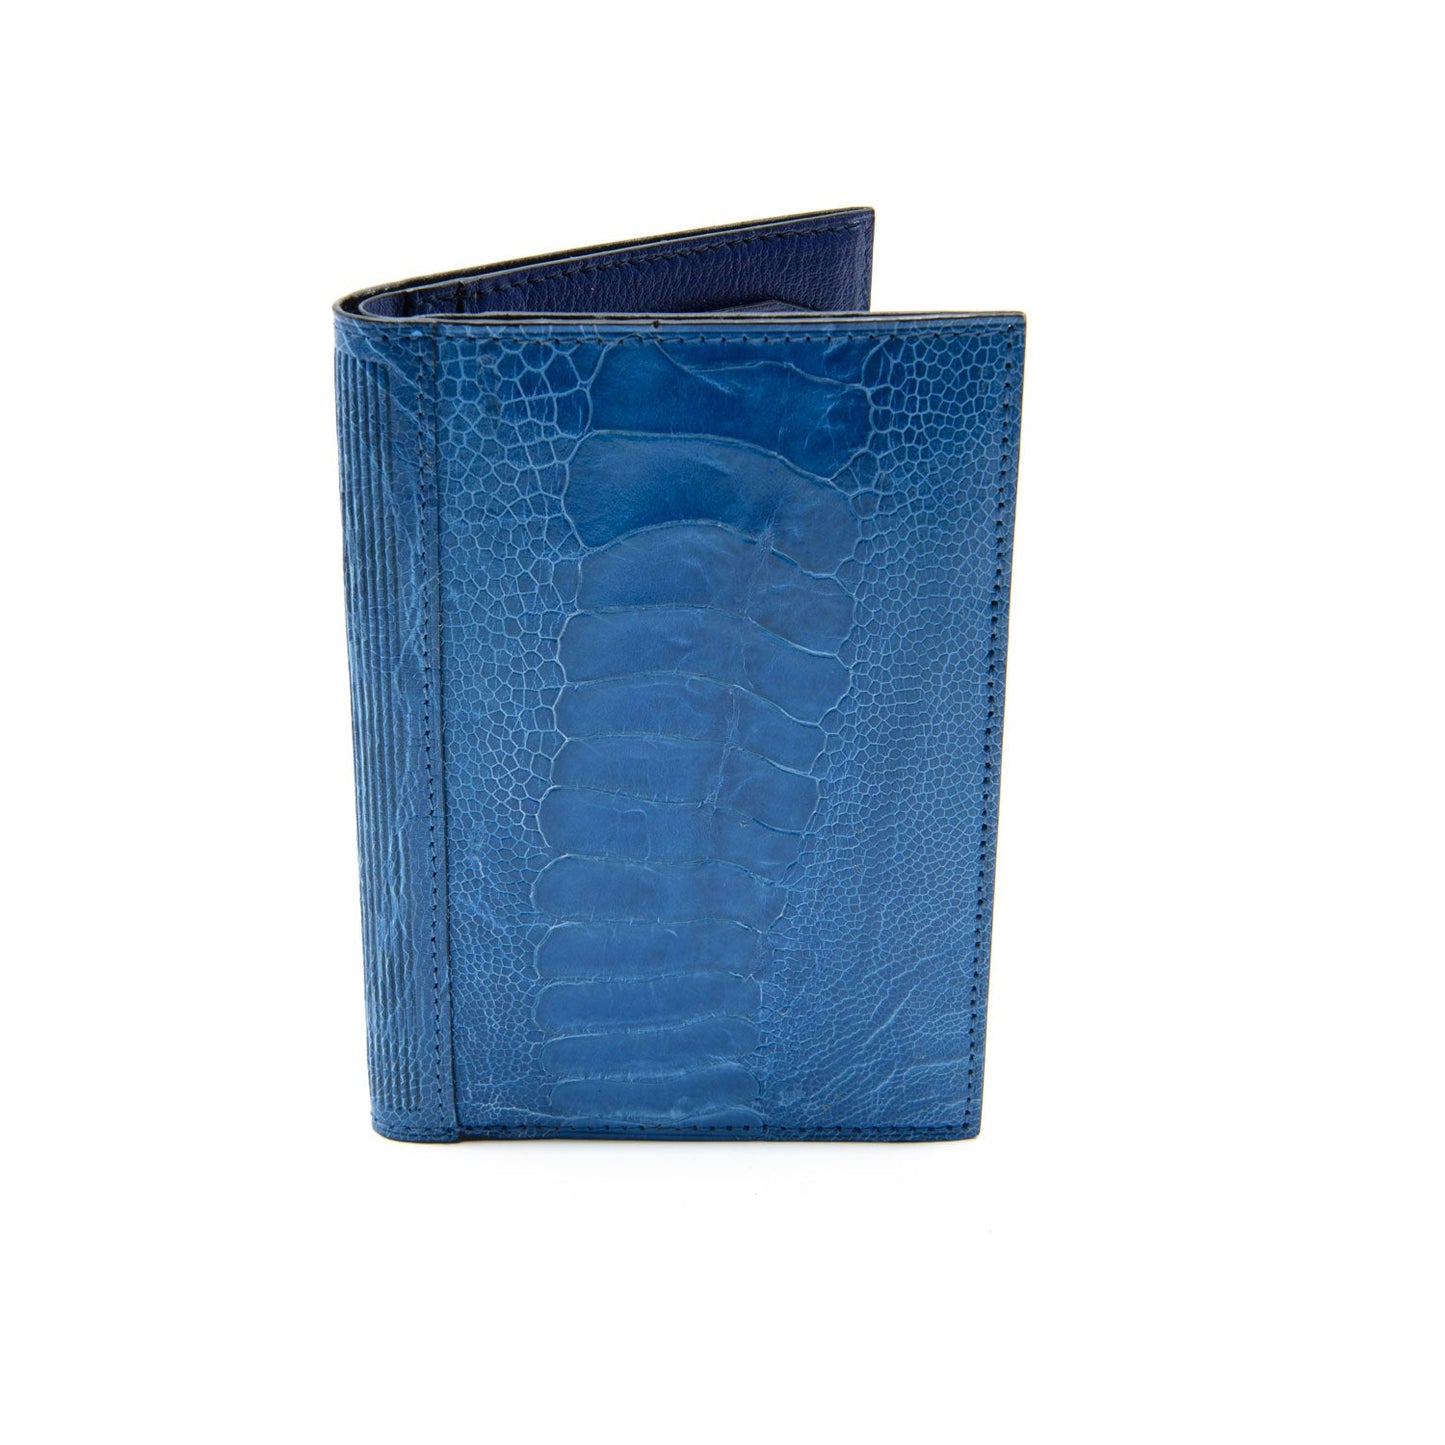 Arizona Ostrich Shin Leather Large Card Holder - Ostrich Leather Wallet